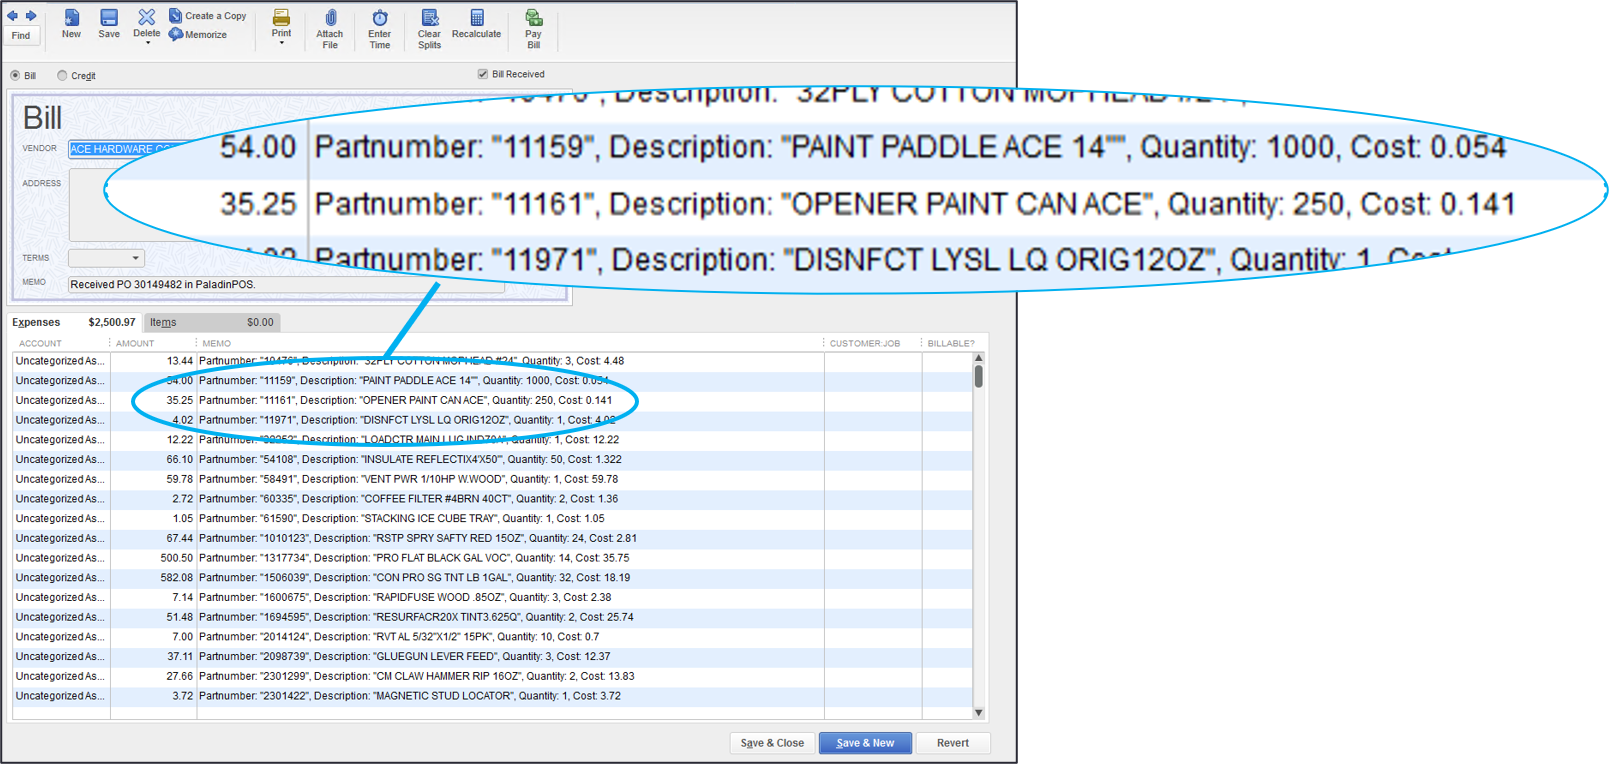 QuickBooks bill showing itemized order items